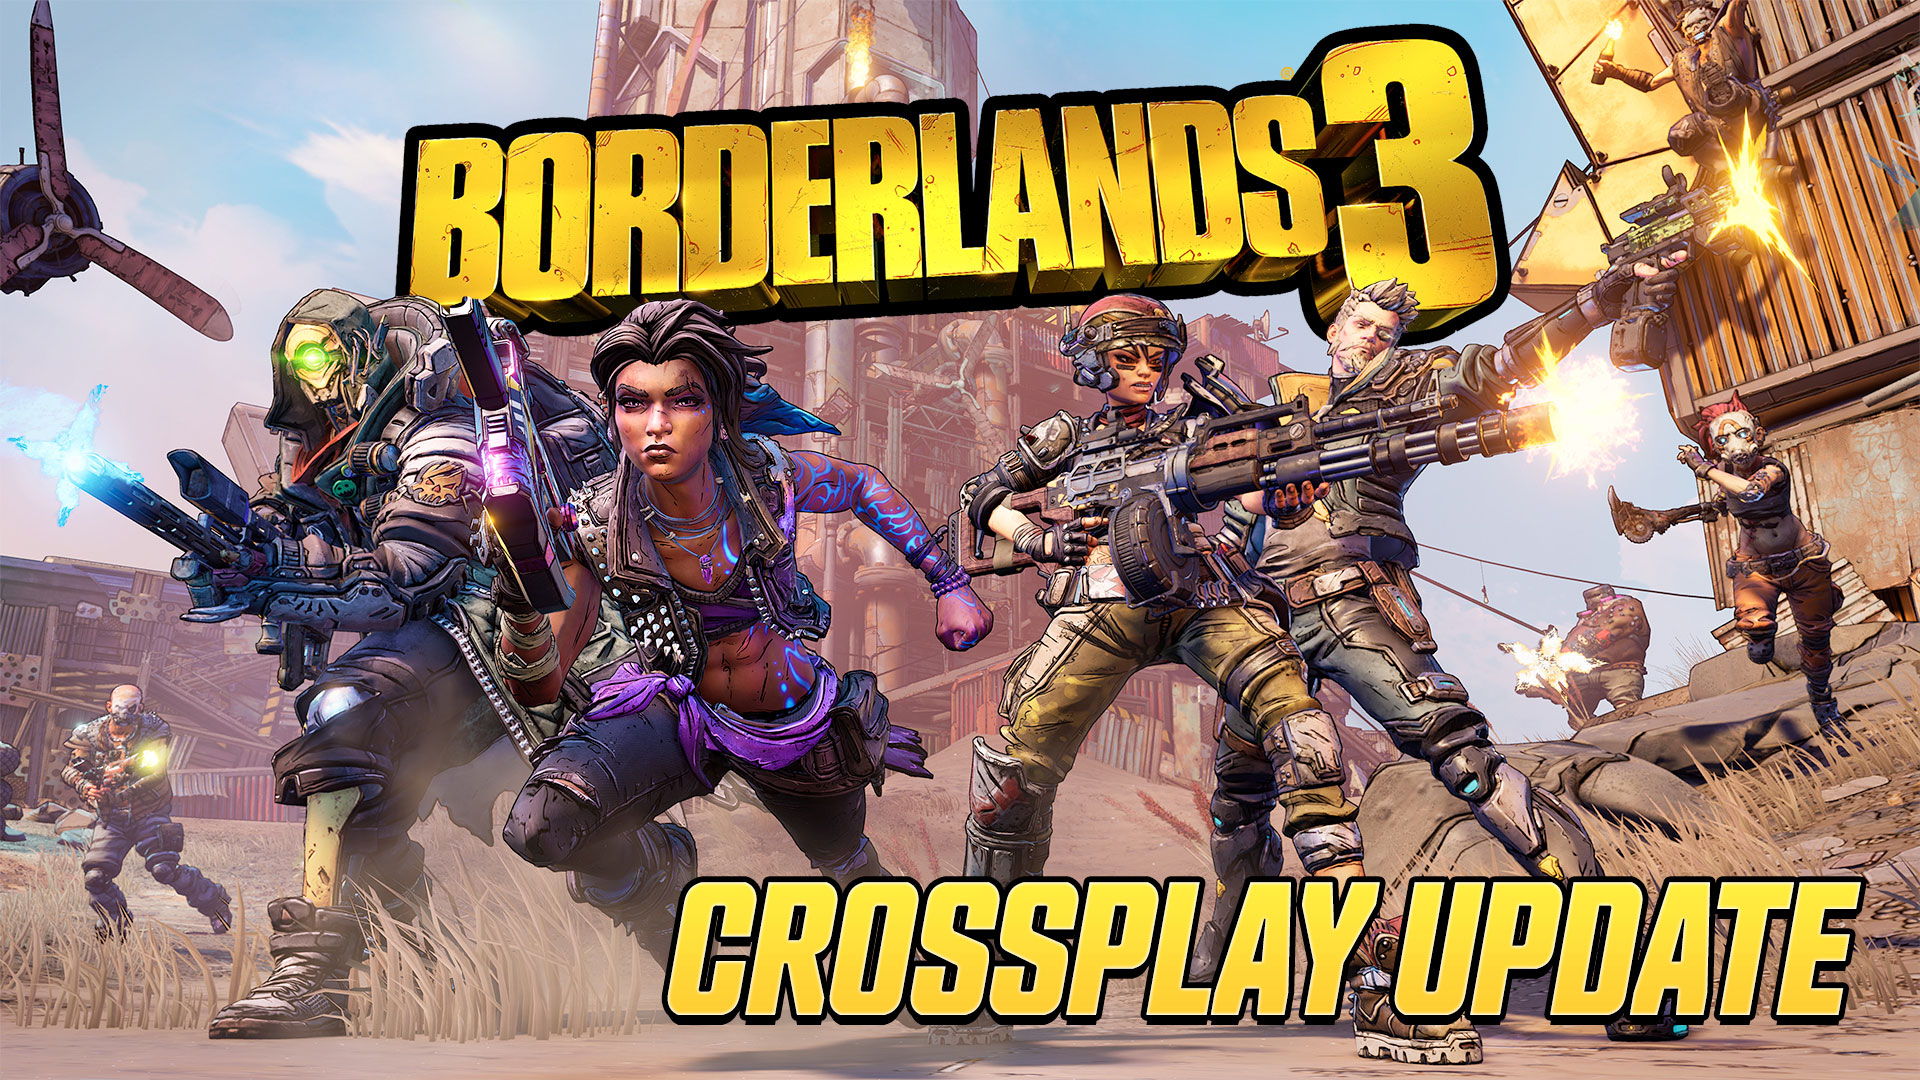 Borderlands 3 Crossplay Update and Revengence of Revenge of the Cartels Event Now Available